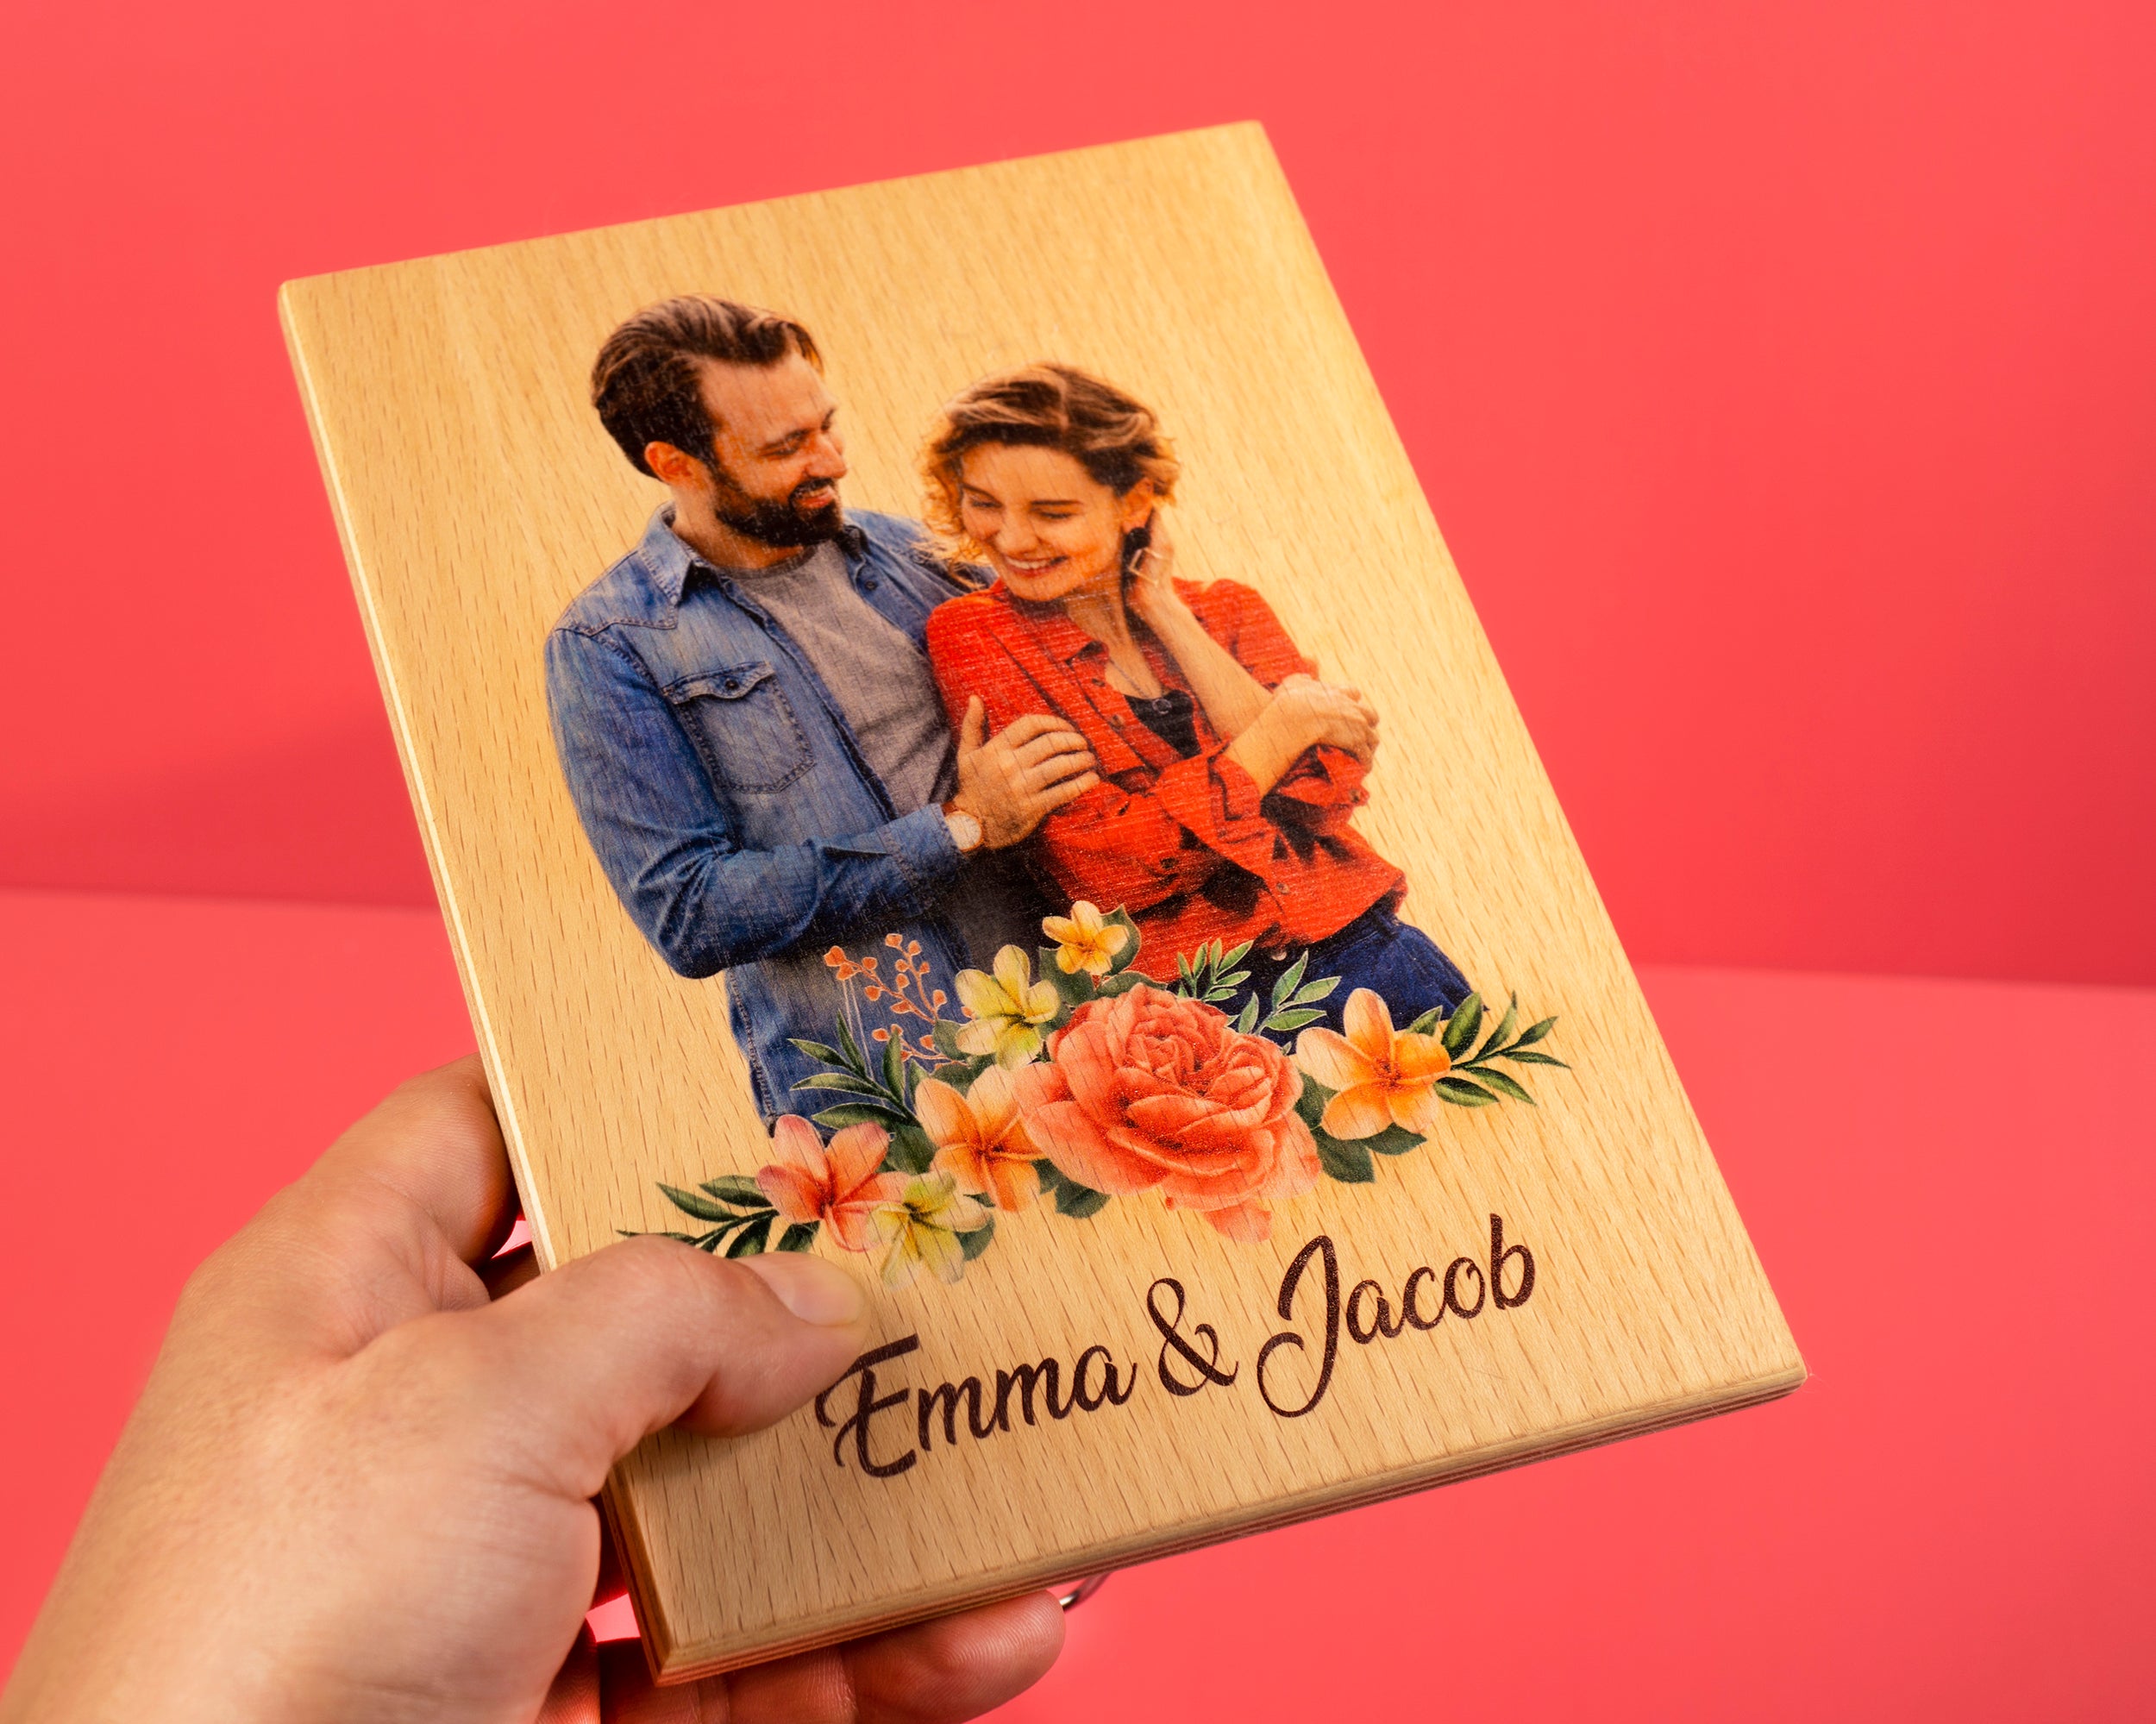 Personalized photo gift on solid wood for special moments of happiness 15x21cm 